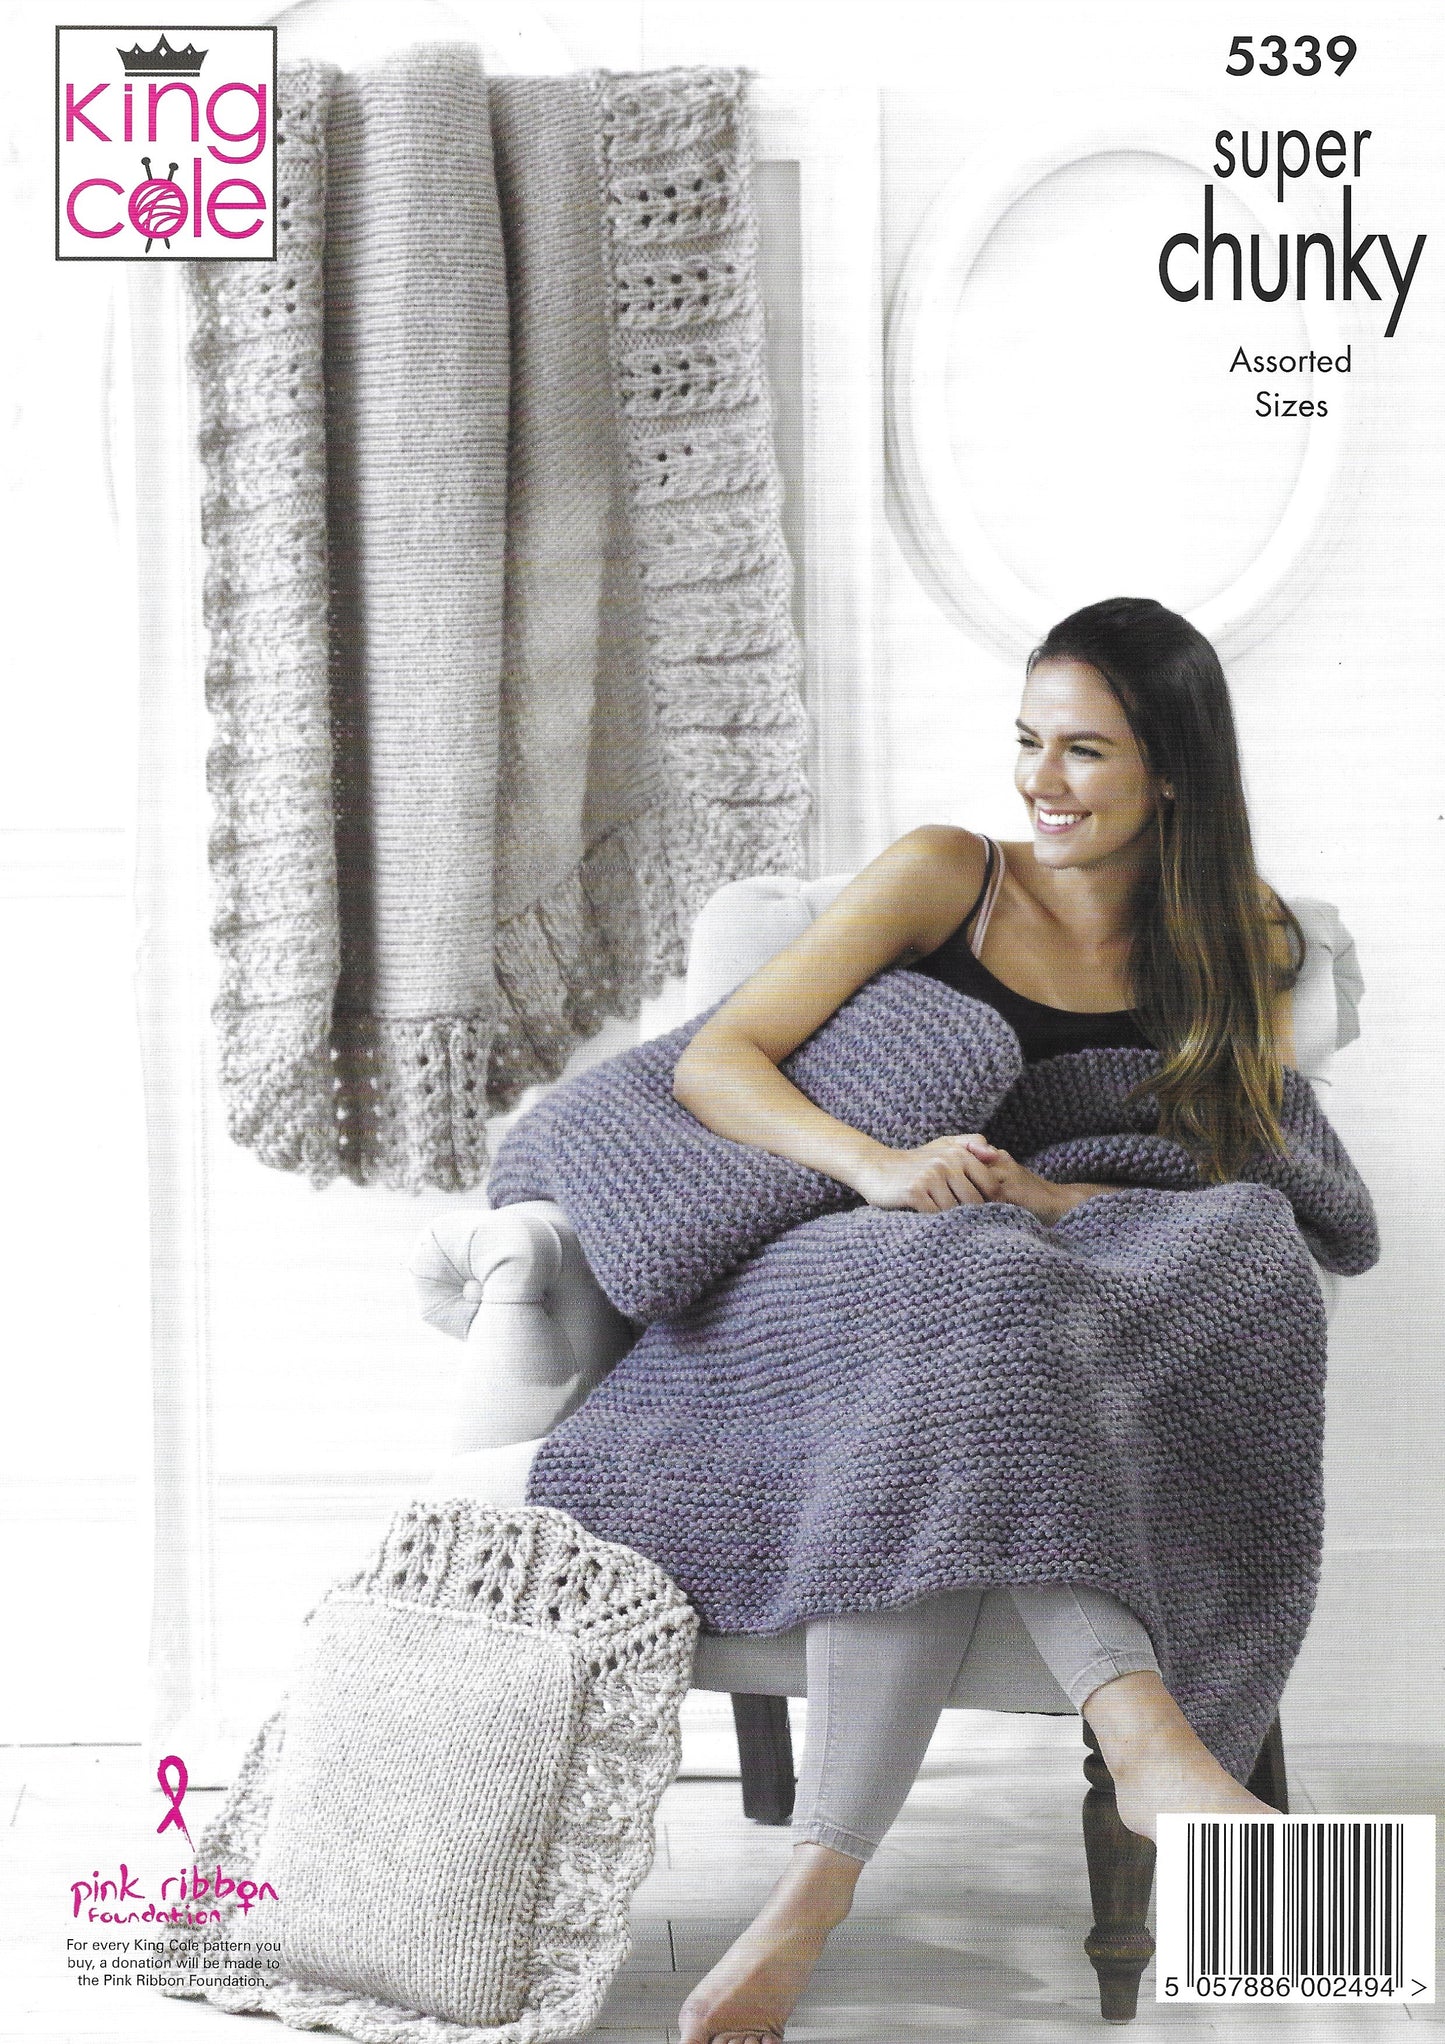 King Cole 5339 Blanket And Cushions Super Chunky Knitting Pattern